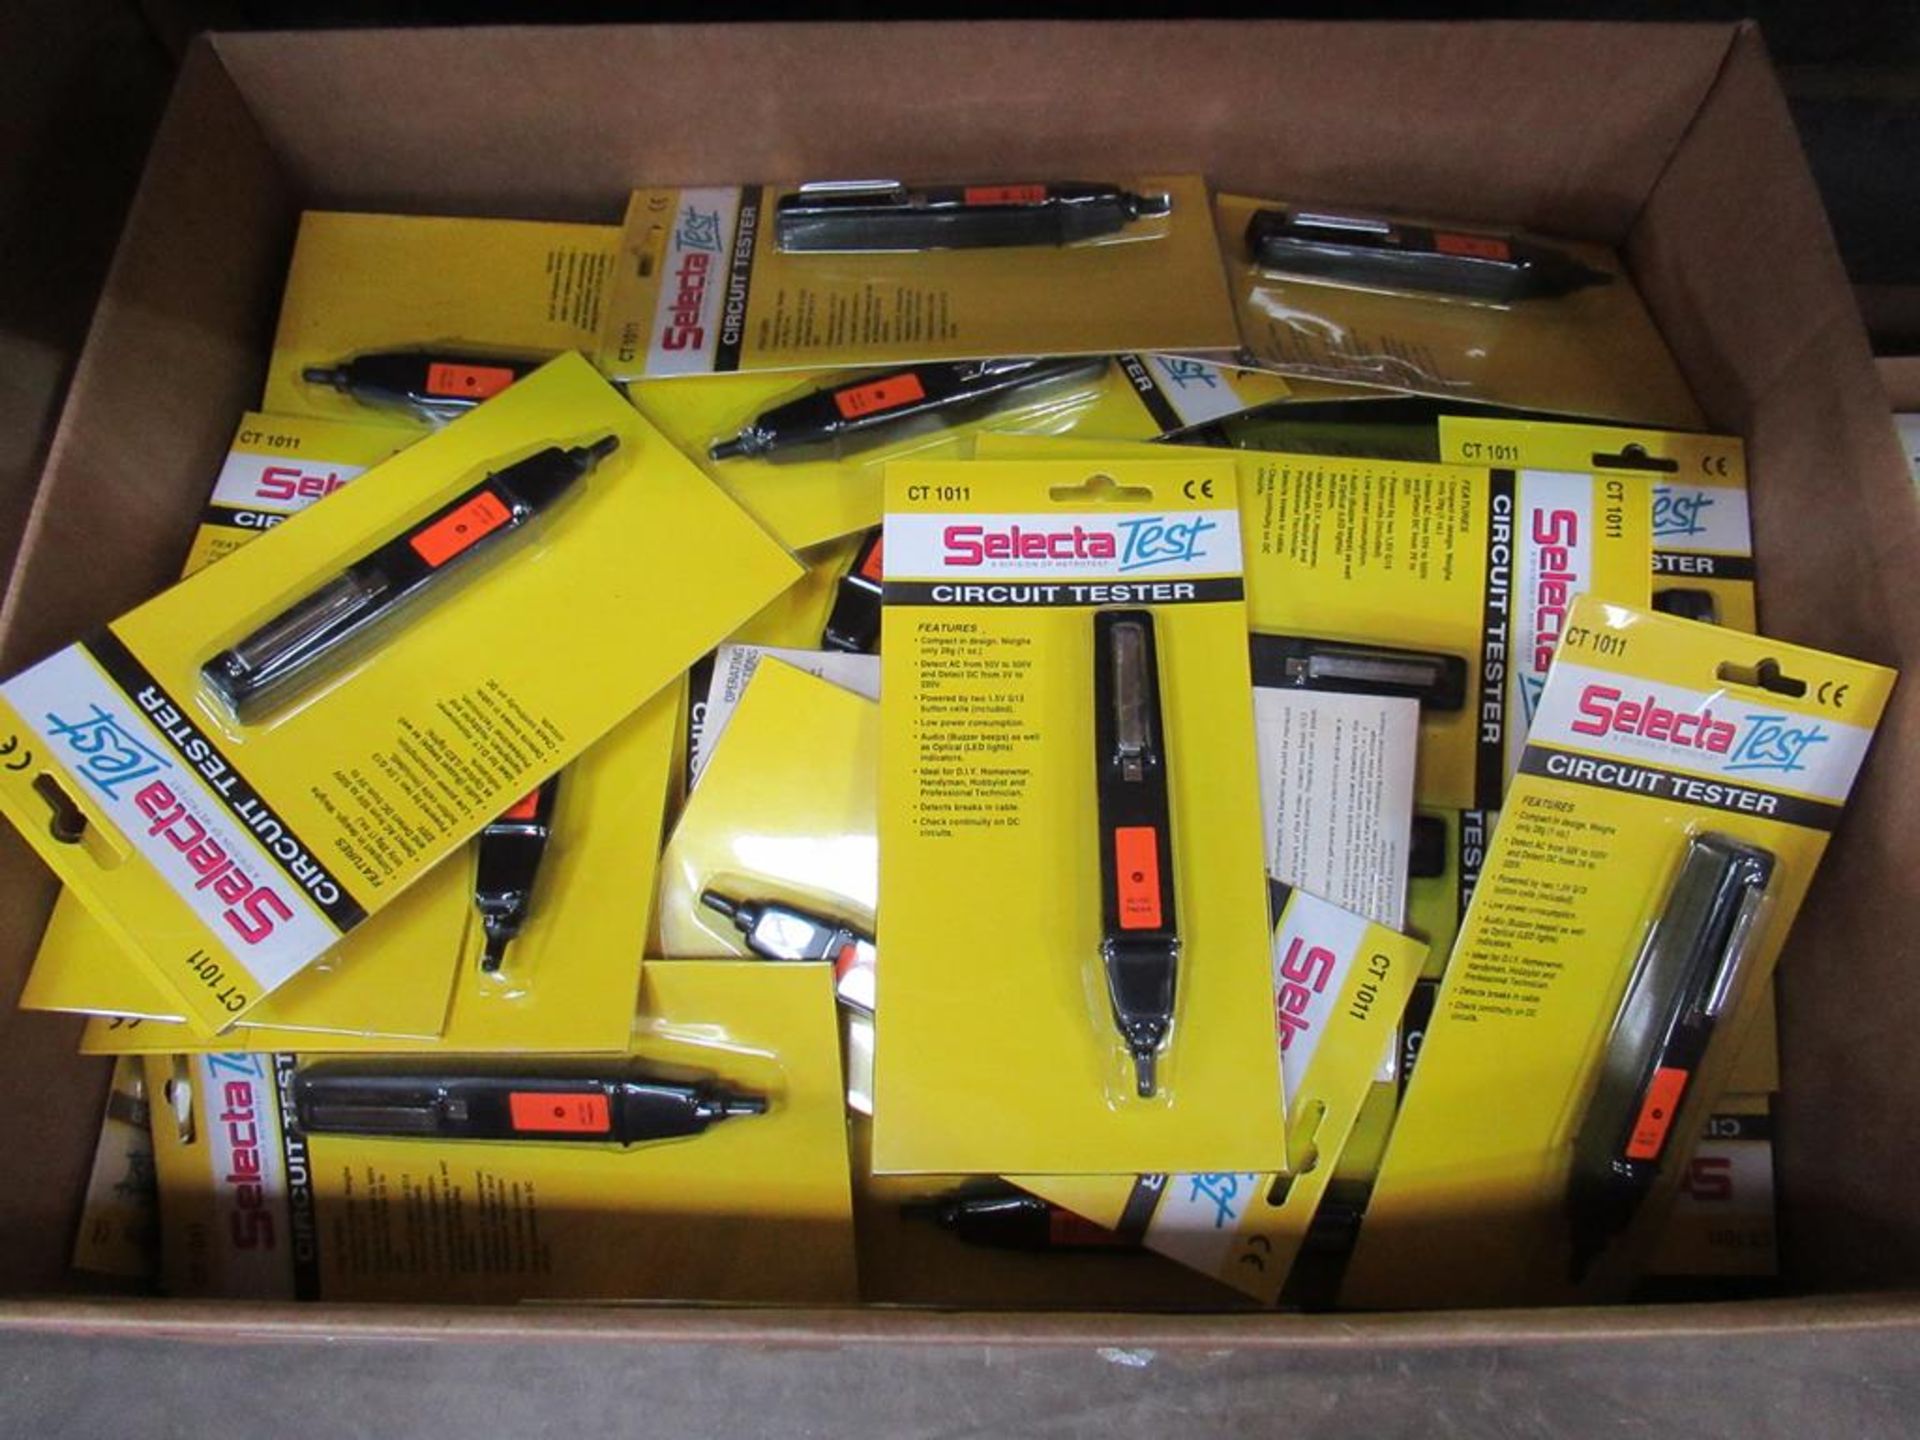 2x Boxes of Hand Tools, Circuit Testers and 5 Piece Tool Sets "Crosspoint/Mex" - Image 2 of 6